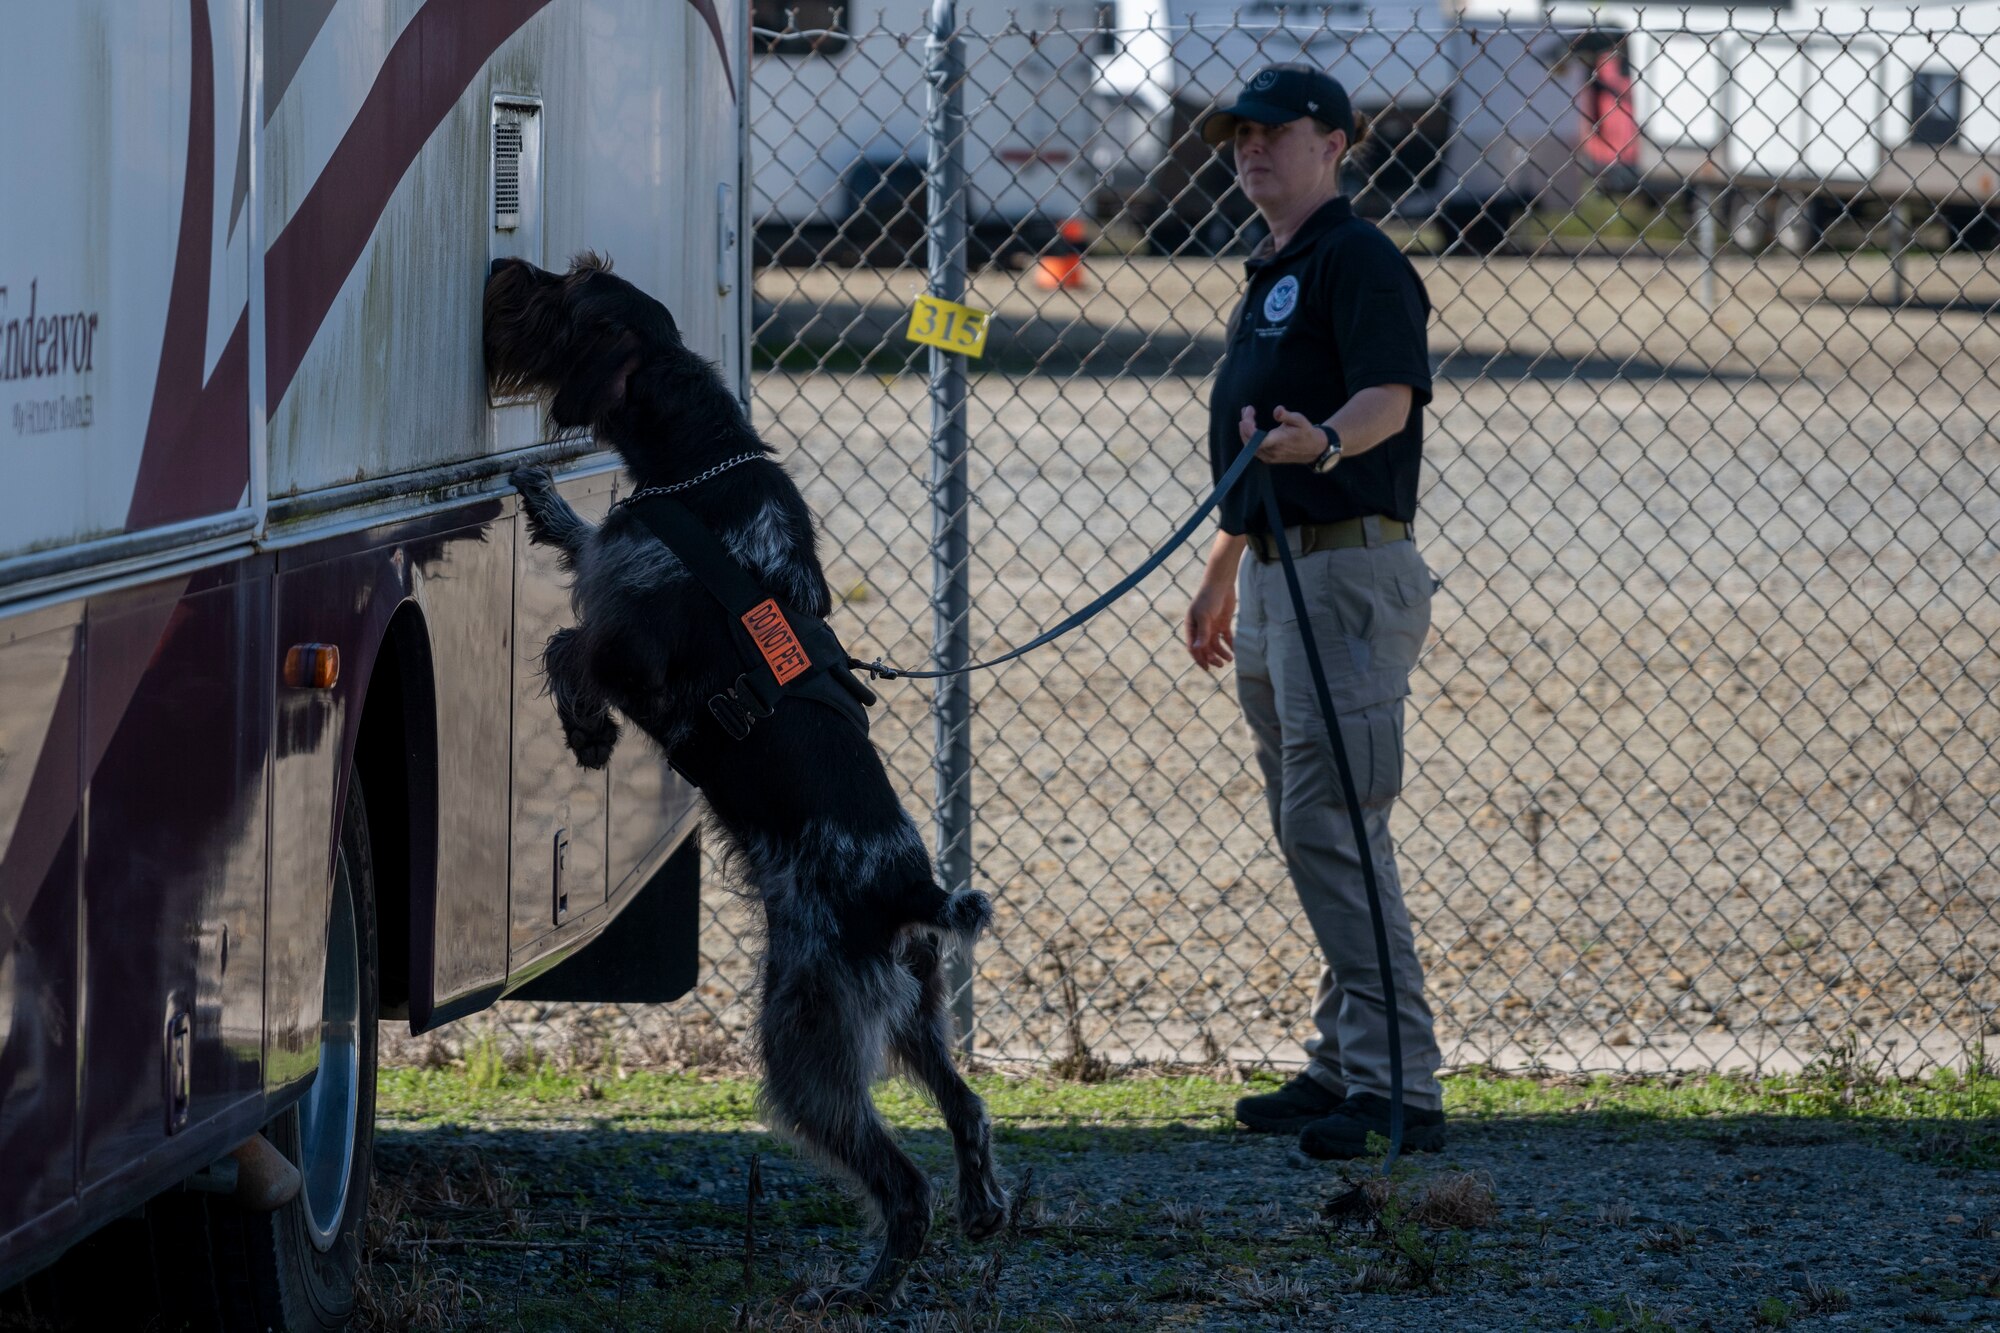 Natalie Weatherburn, Transportation Security Administration explosive detection K-9 handler, and her K-9, Eyes-Abel, participate in training exercise with the 4th Security Forces Squadron military working dog flight at Seymour Johnson Air Force Base, North Carolina, Sept. 21, 2022. During the training exercise, a K-9 and their handler stepped into an unfamiliar setting where they conducted a thorough search of the area and were judged by a panel of their peers on their overall performance as a team when detecting explosives or narcotics. (U.S. Air Force photo by Senior Airman Kevin Holloway)